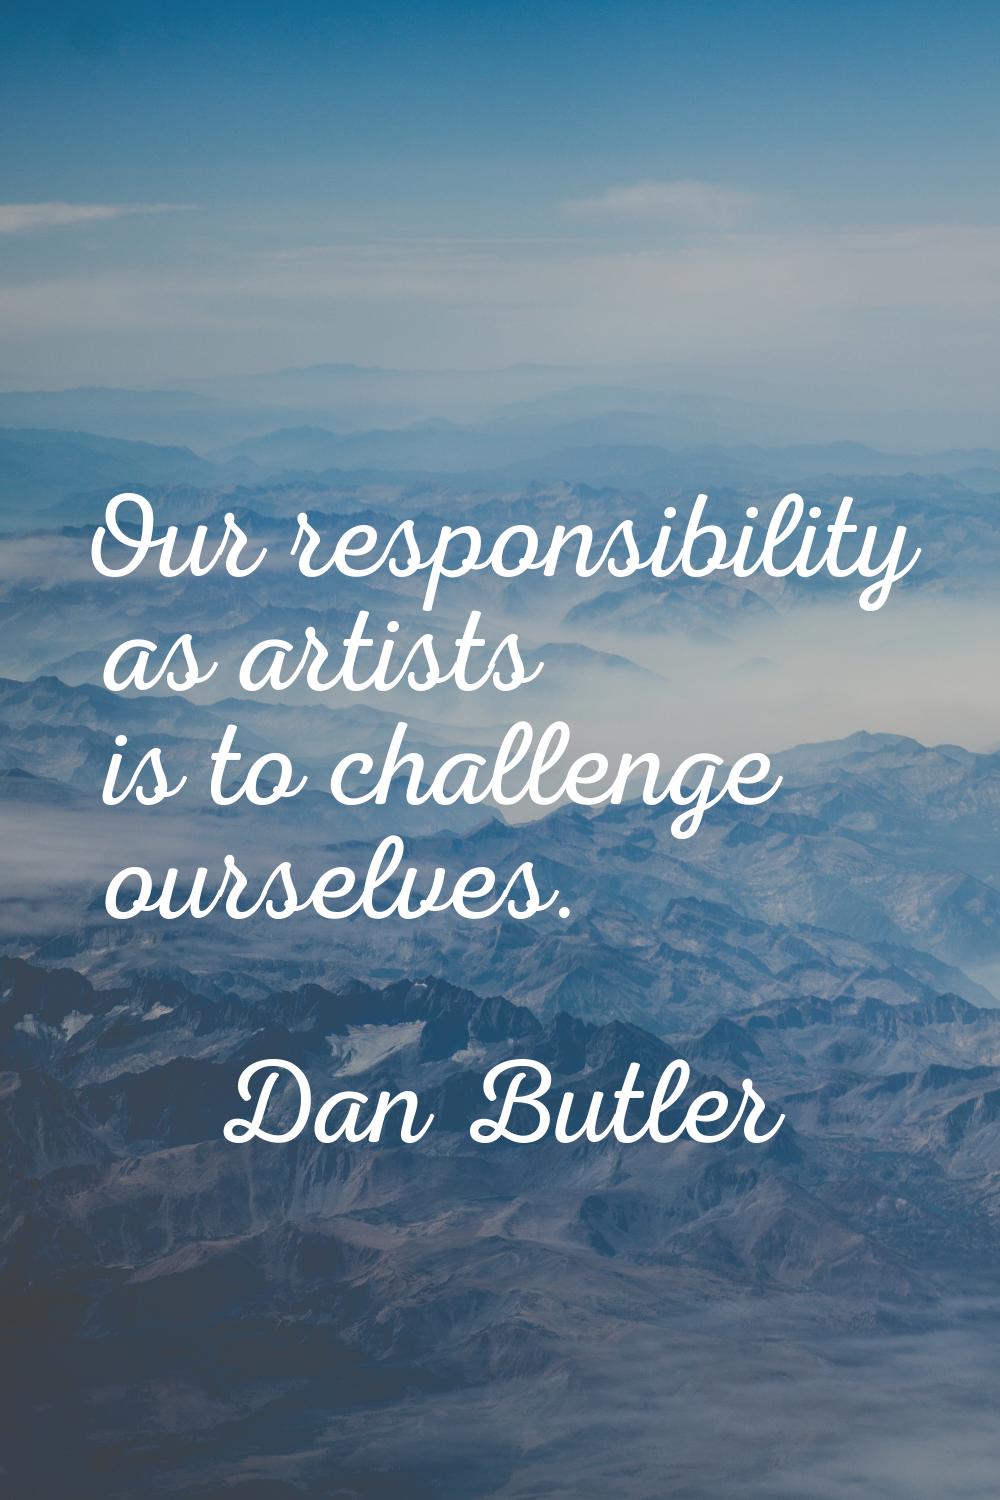 Our responsibility as artists is to challenge ourselves.